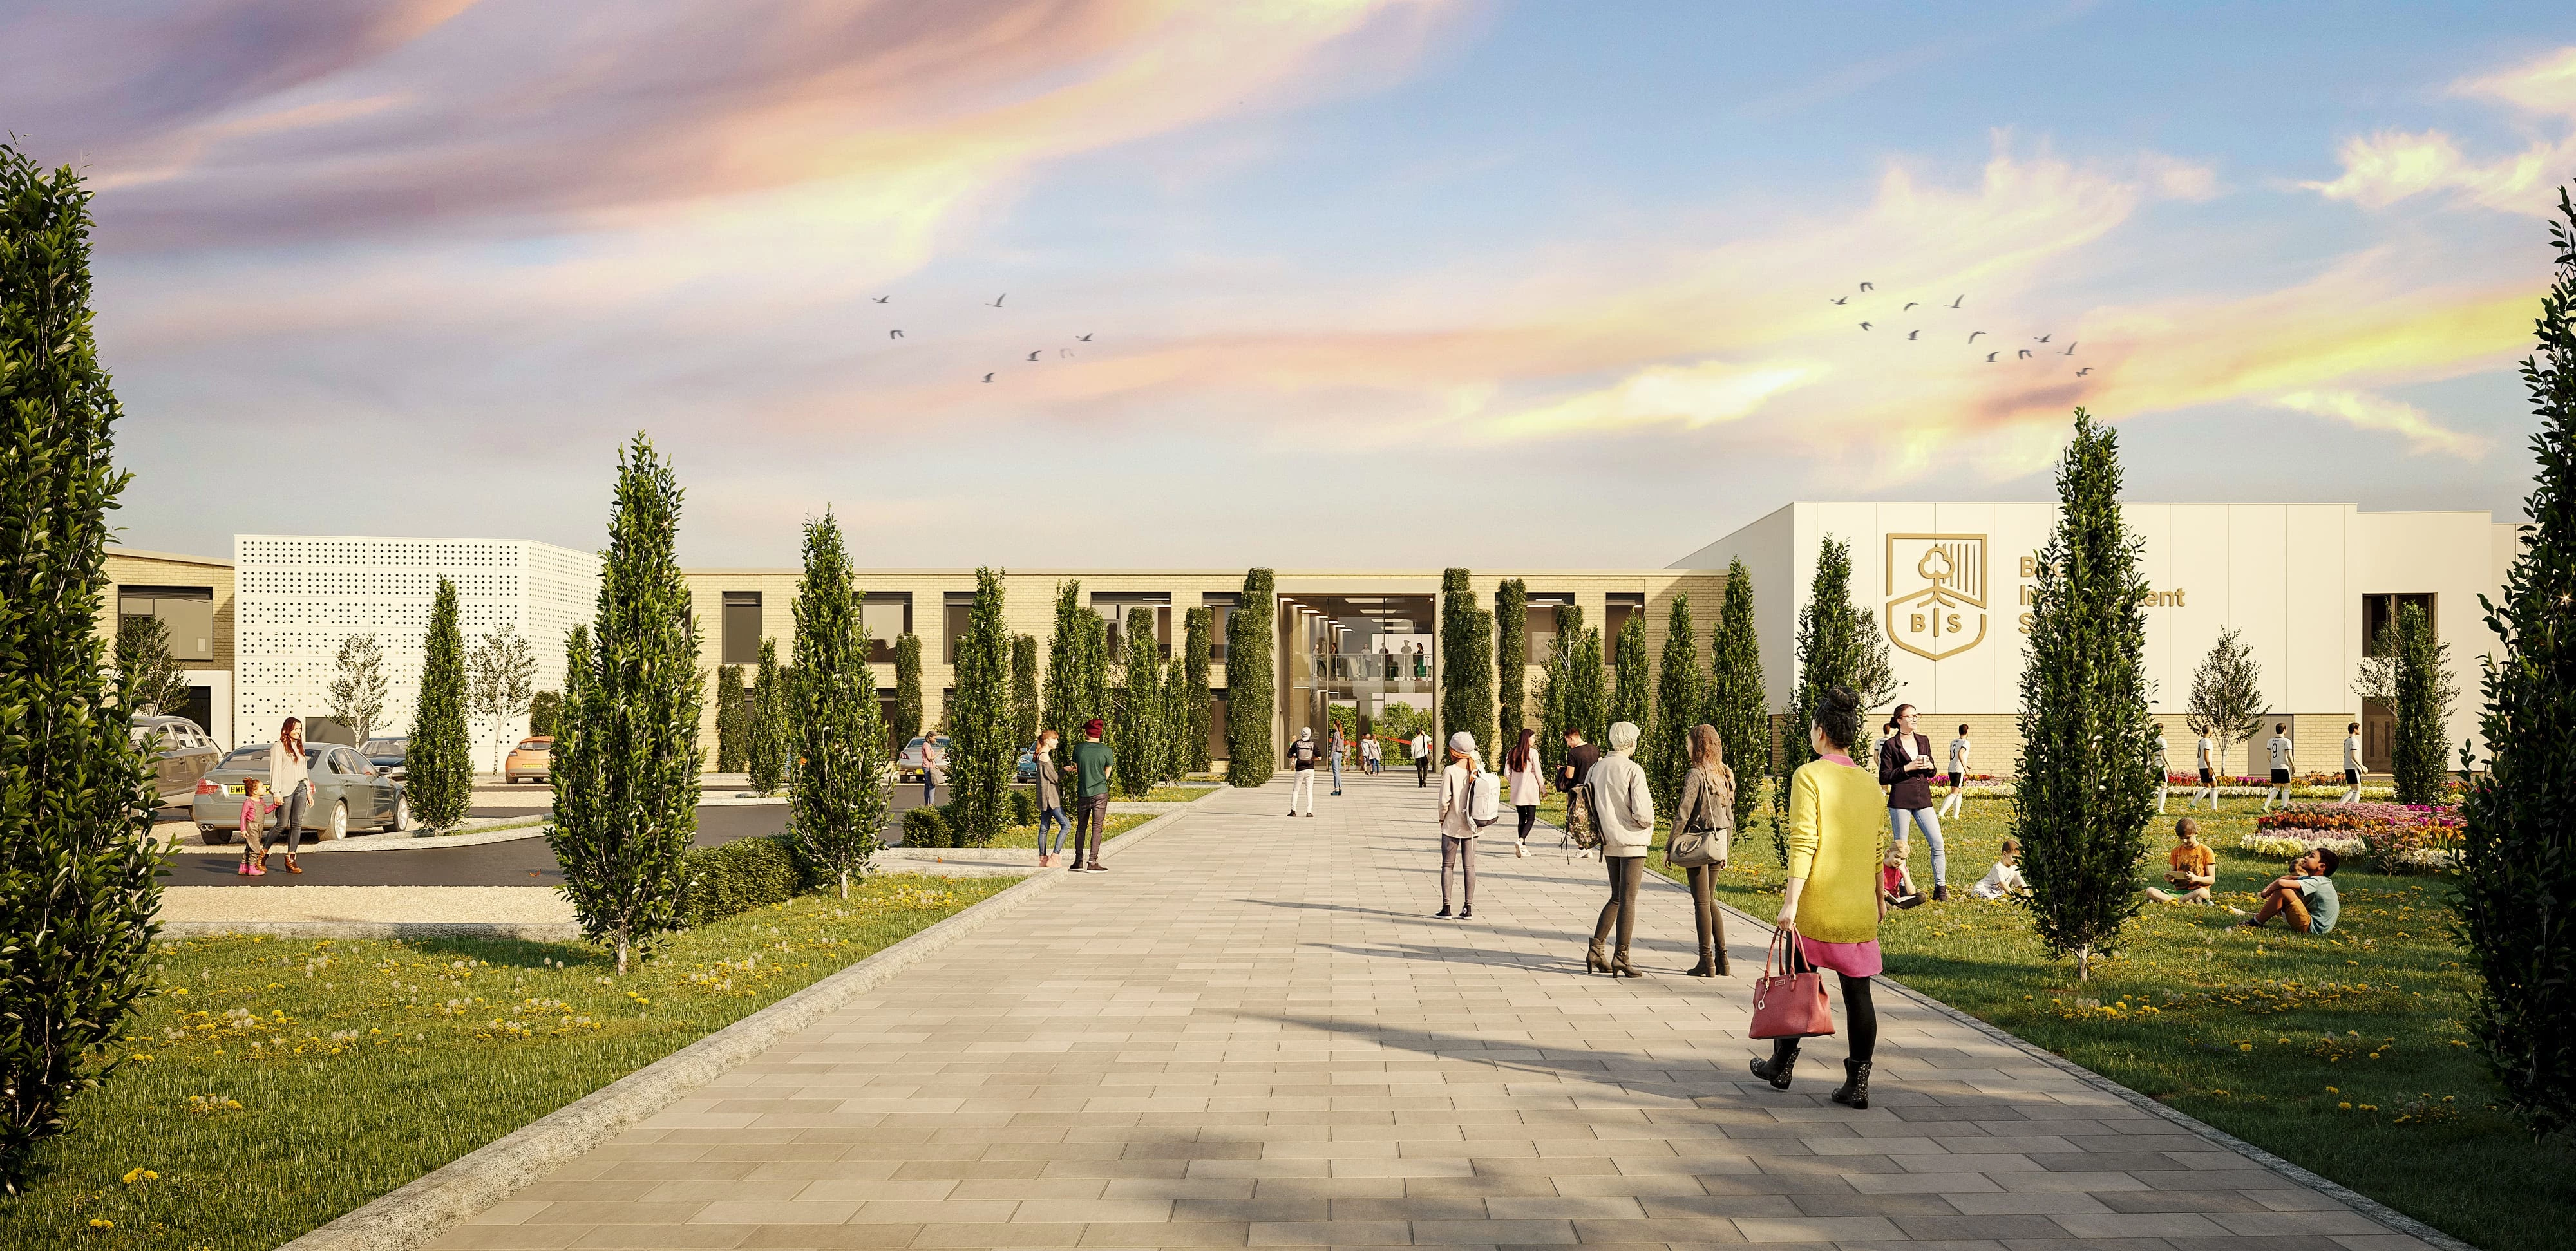 An artist's impression of what Bedford Greenacre Independent School's new site could look like.